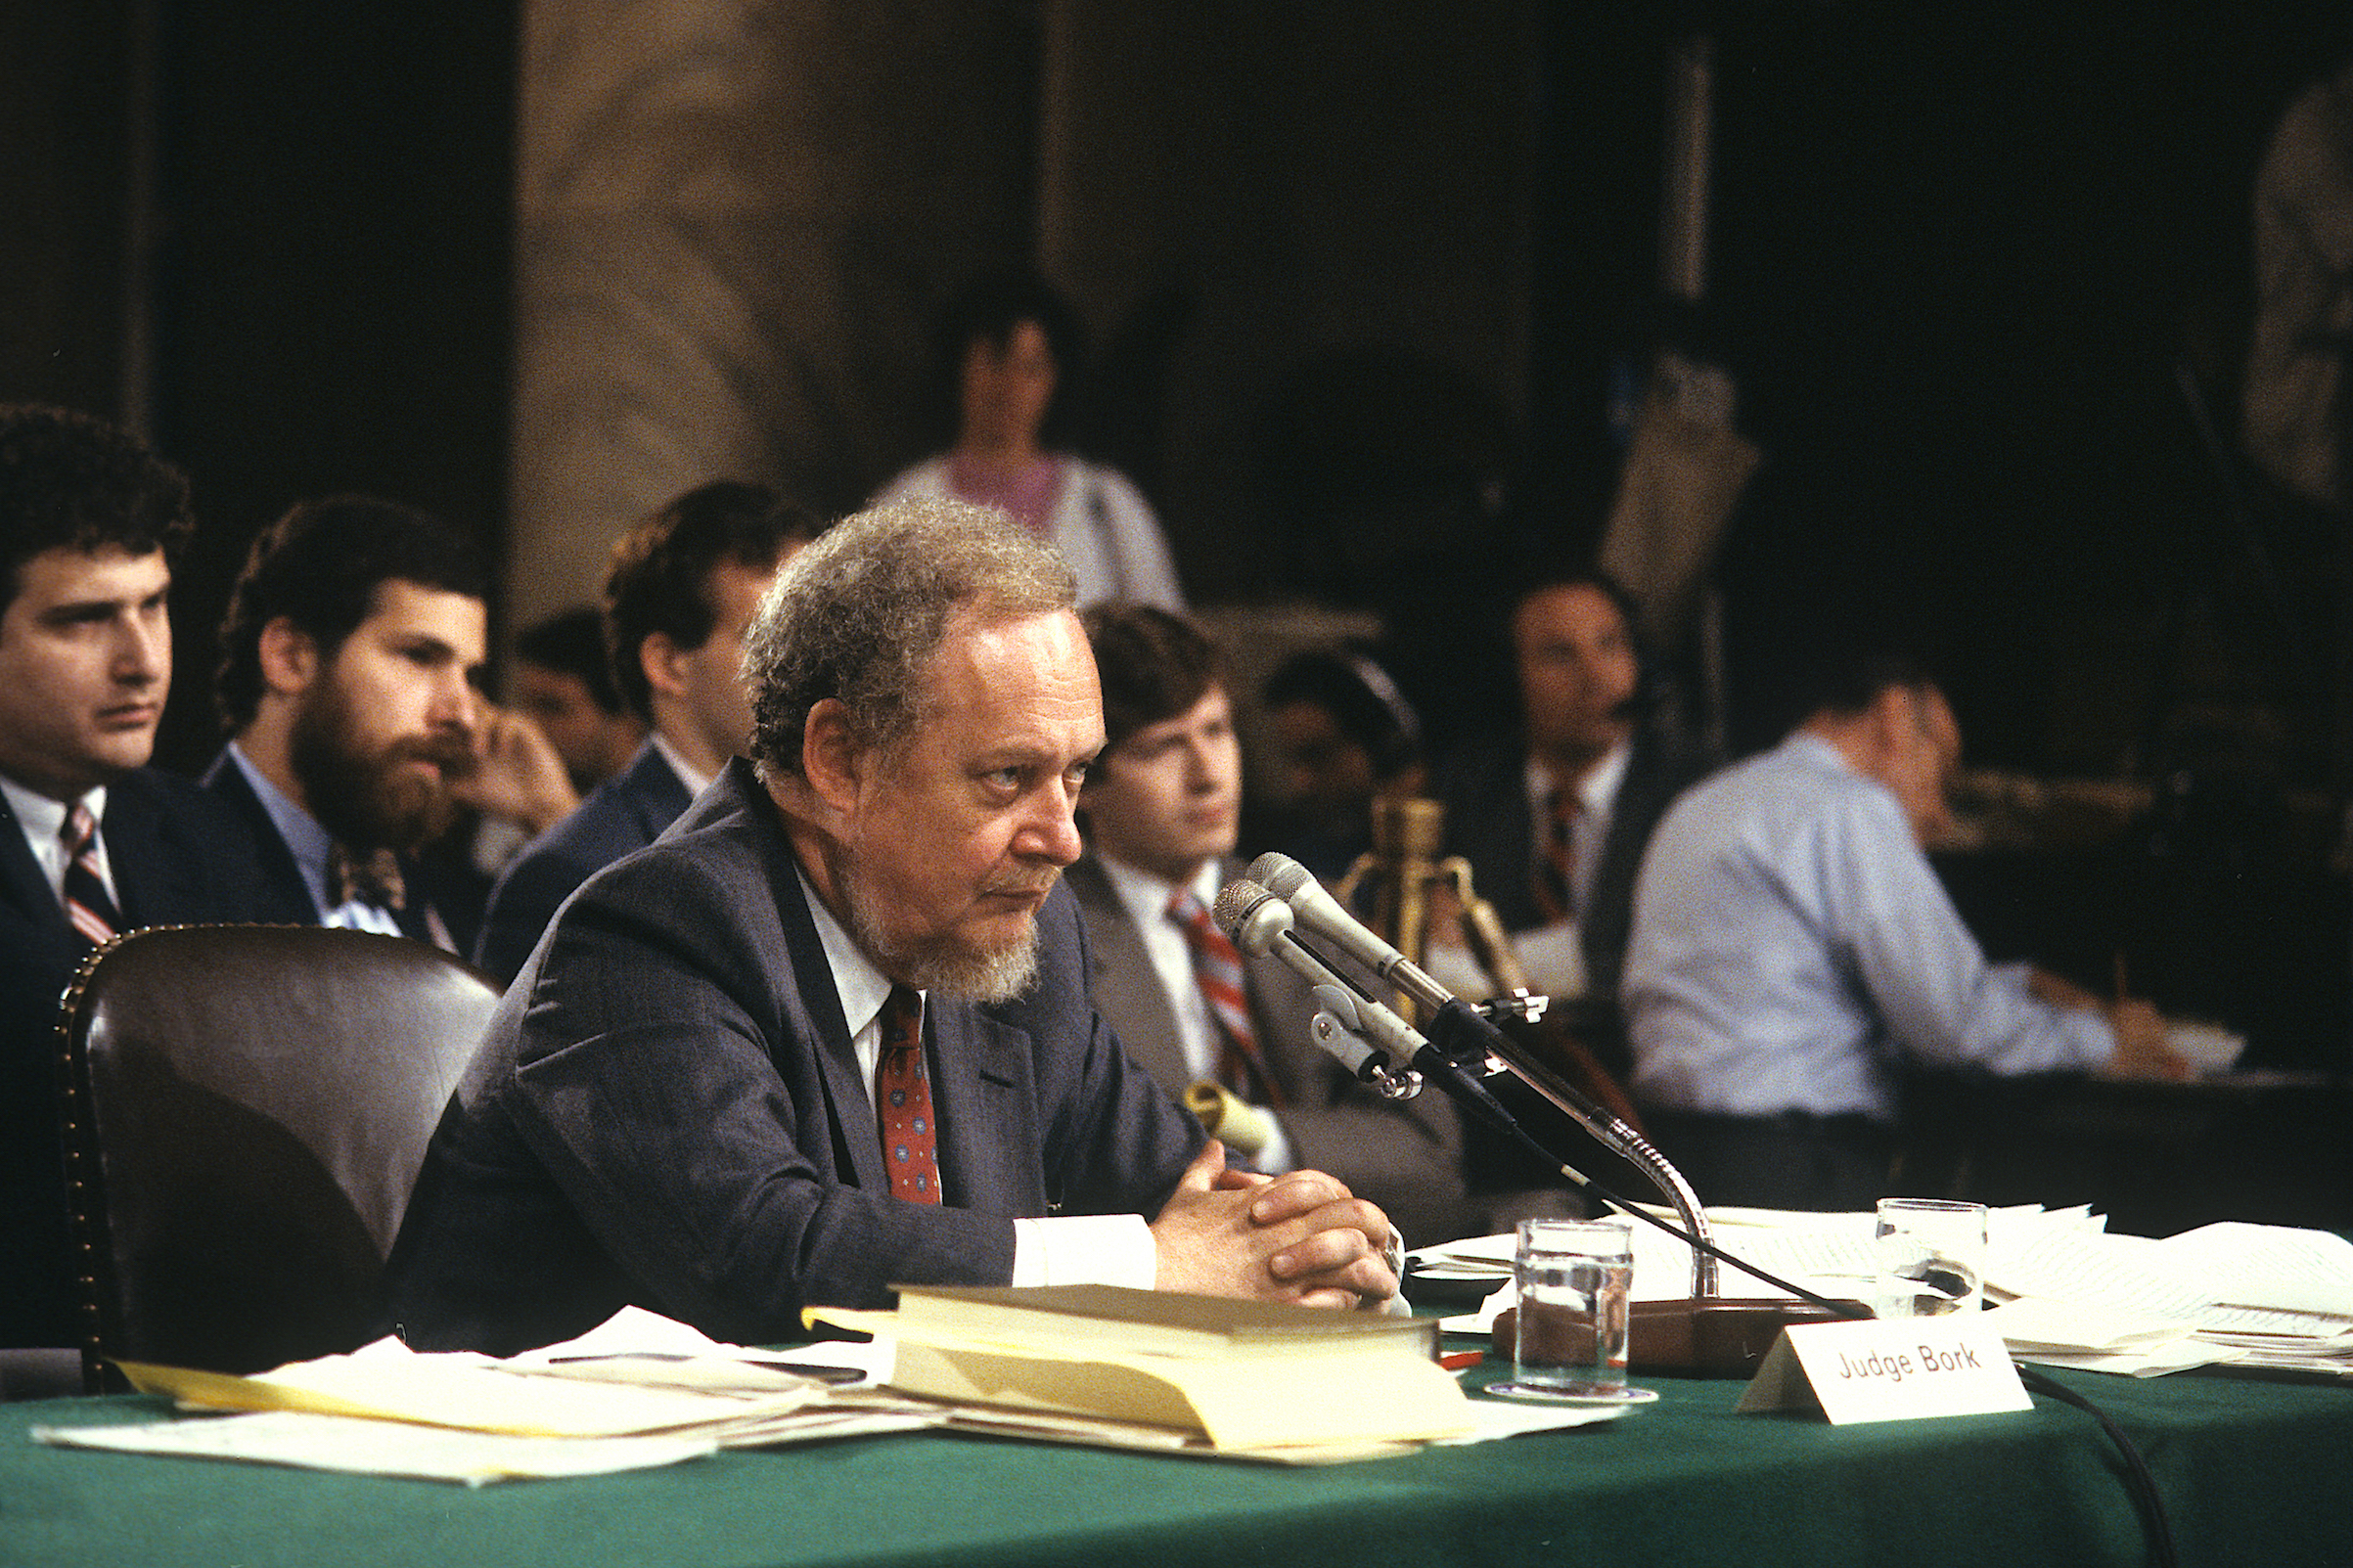 American jurist Judge Robert Bork (1927 - 2012) testifies before the Senate Judiciary Committee on the final day of his Supreme Court confirmation hearing, Washington D.C., Sept. 20, 1987. (Mark Reinstein—Getty Images)